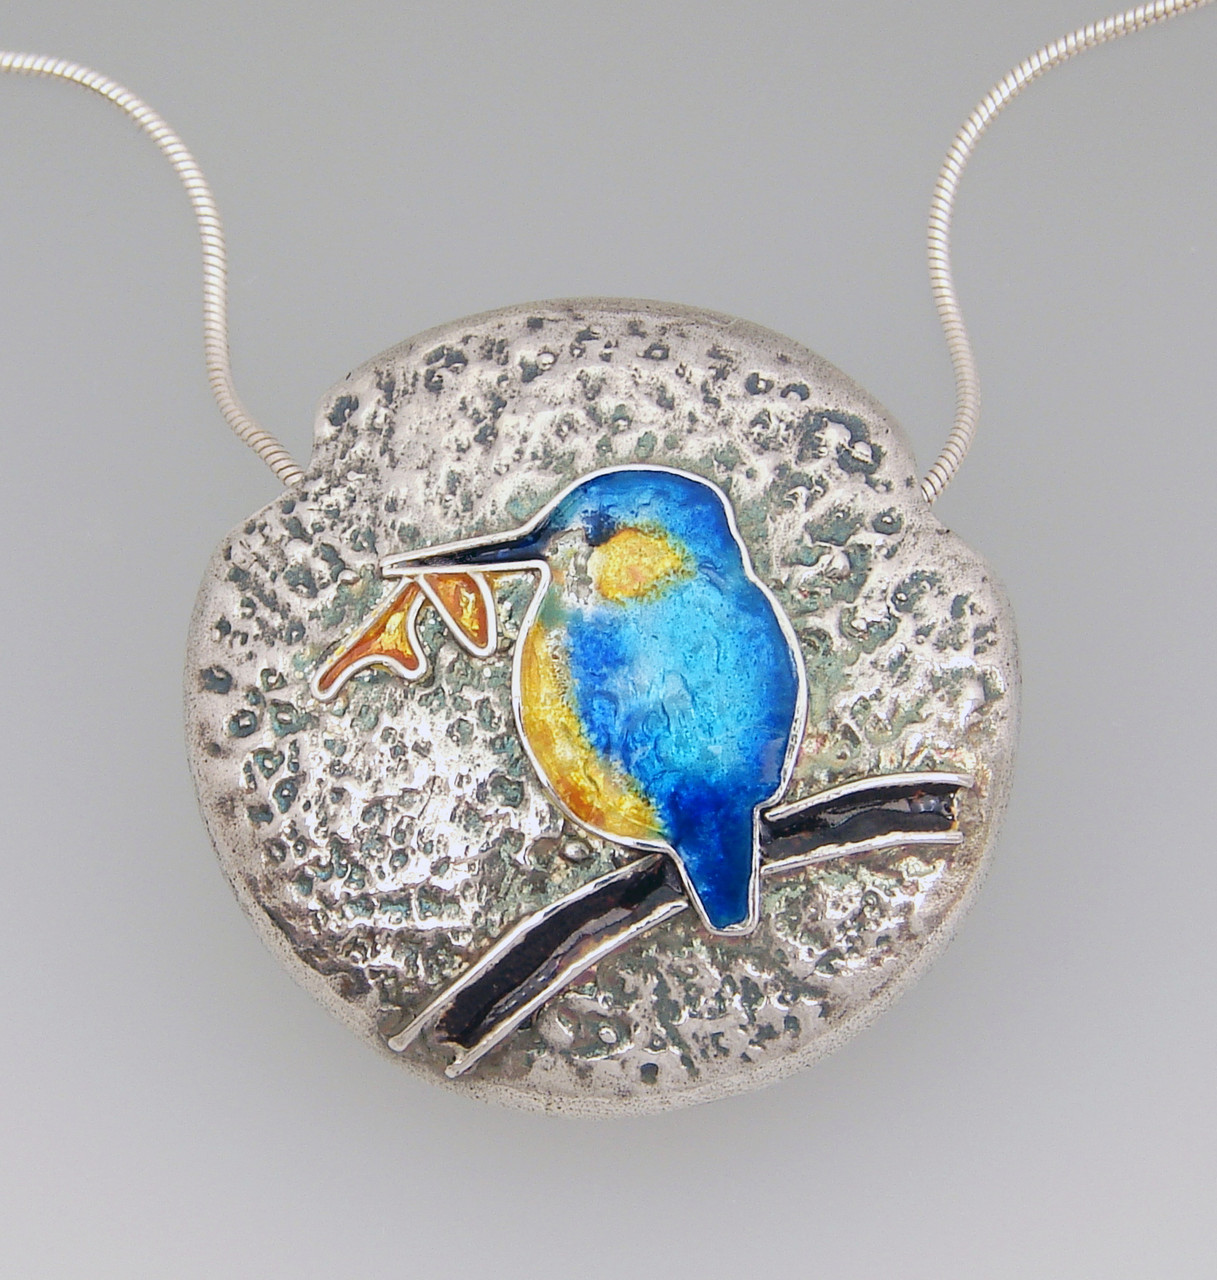 Learn how to make this yourself, join Joy's enamelling on silver class 